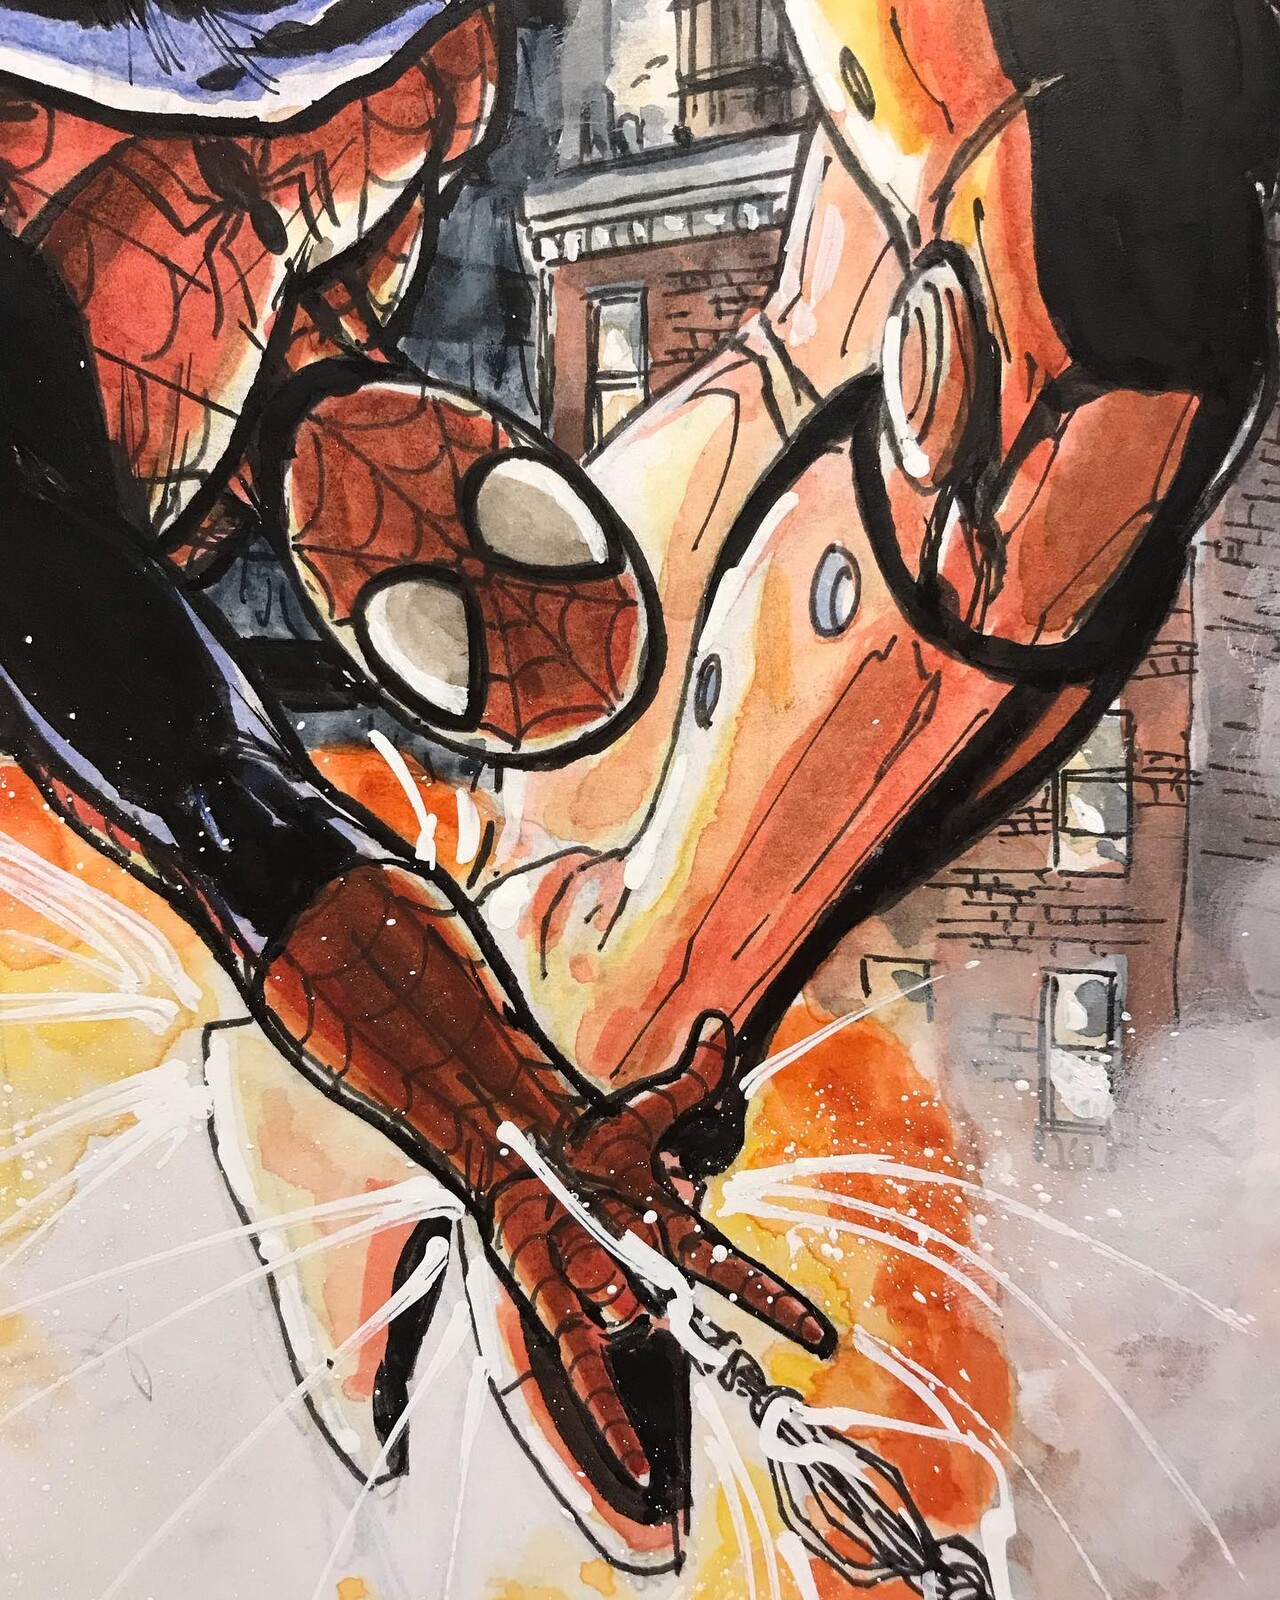 Detail of Iron Man and Spider-Man finished ink and watercolor commission.